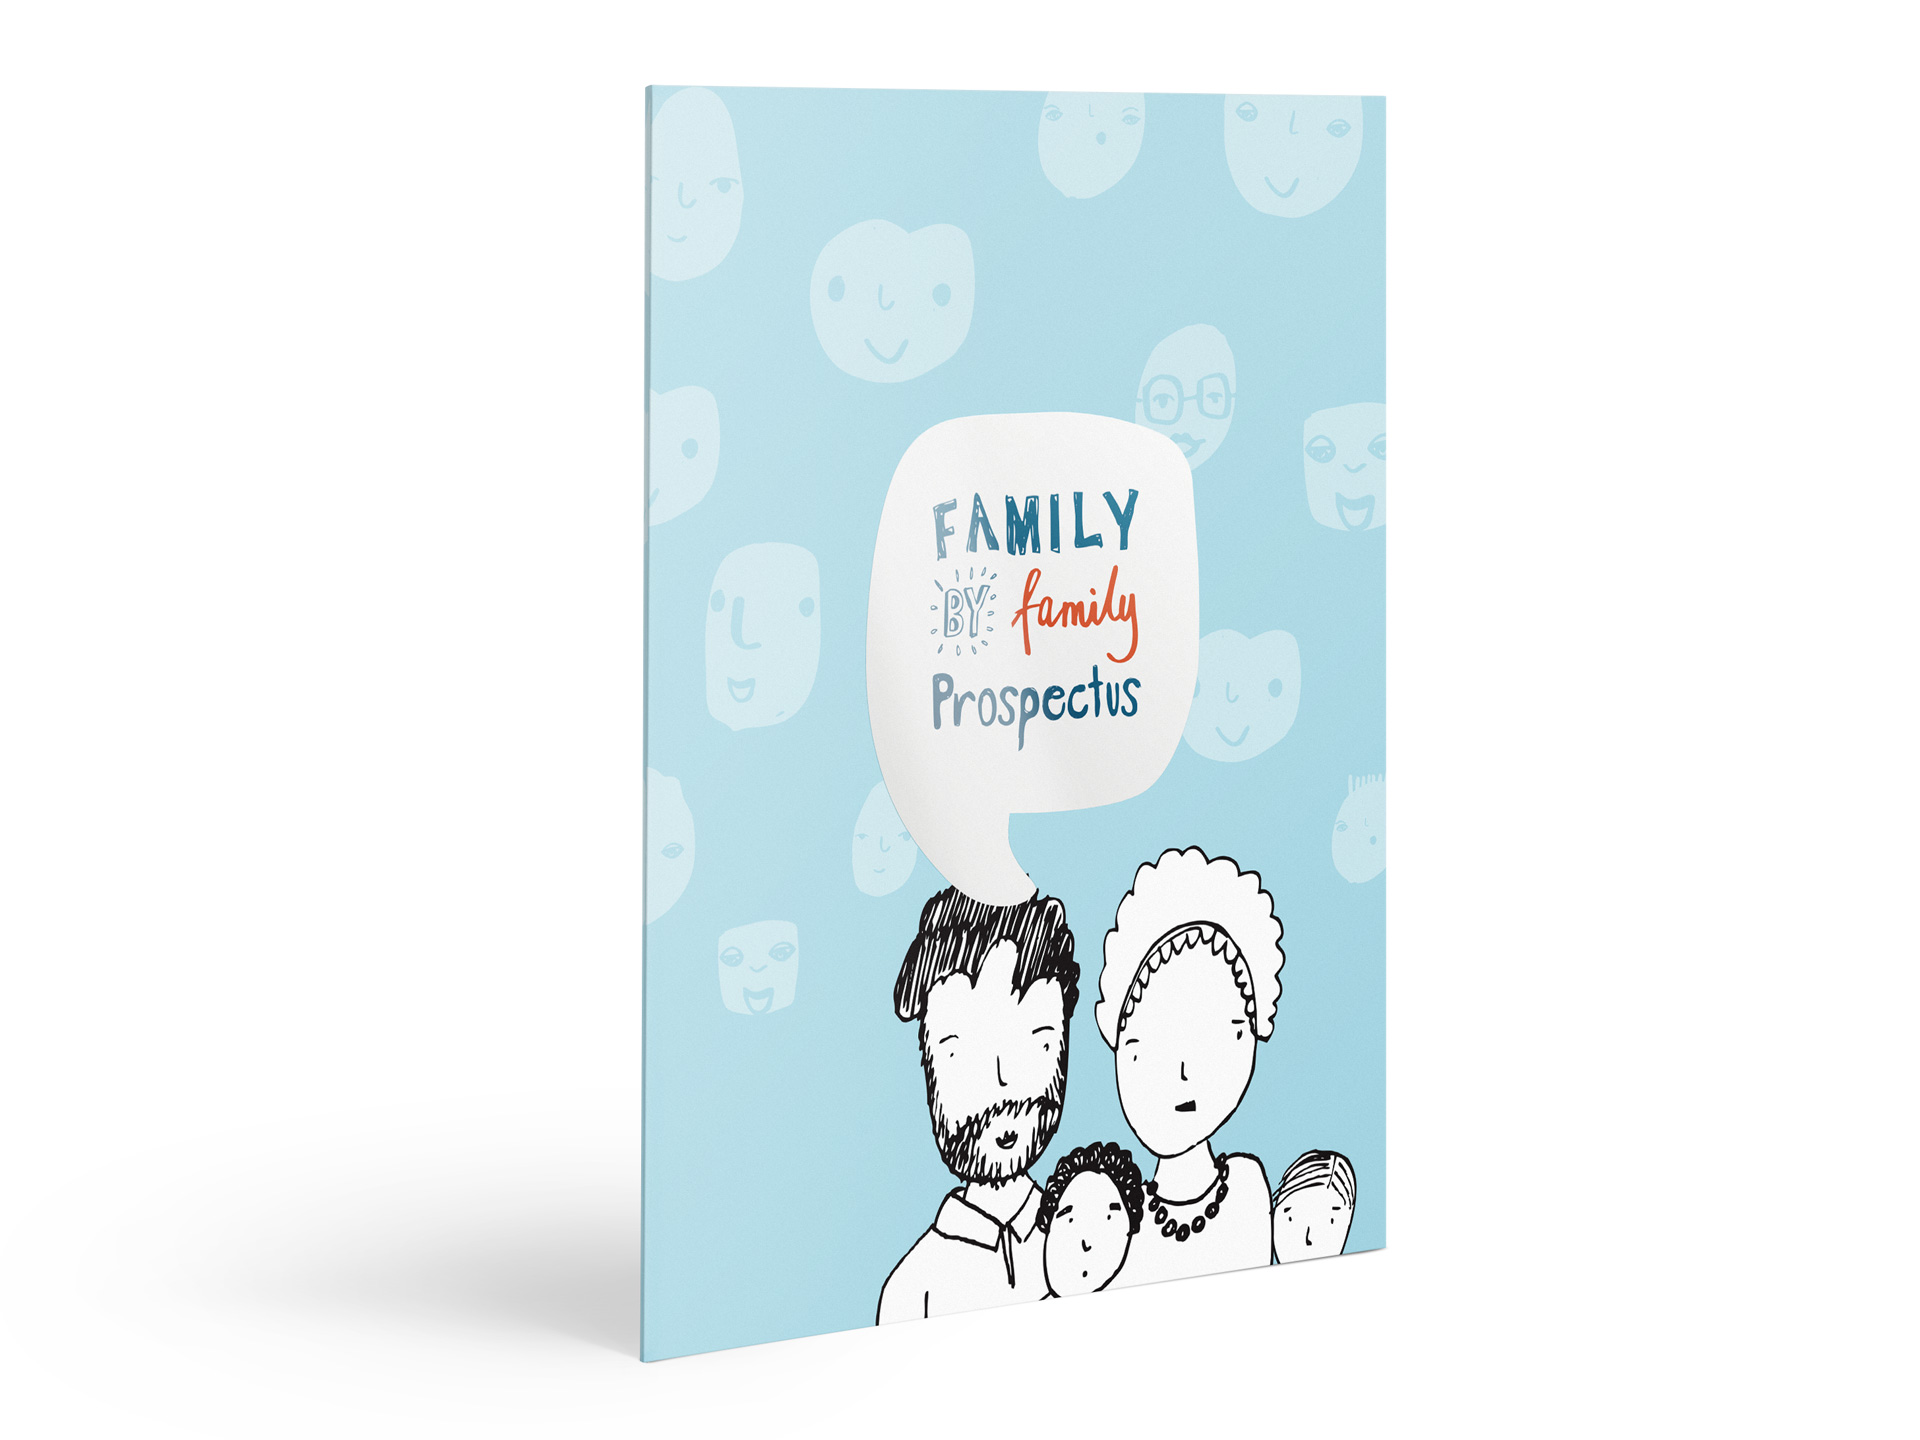 Front cover of Family by Family prospectus booklet